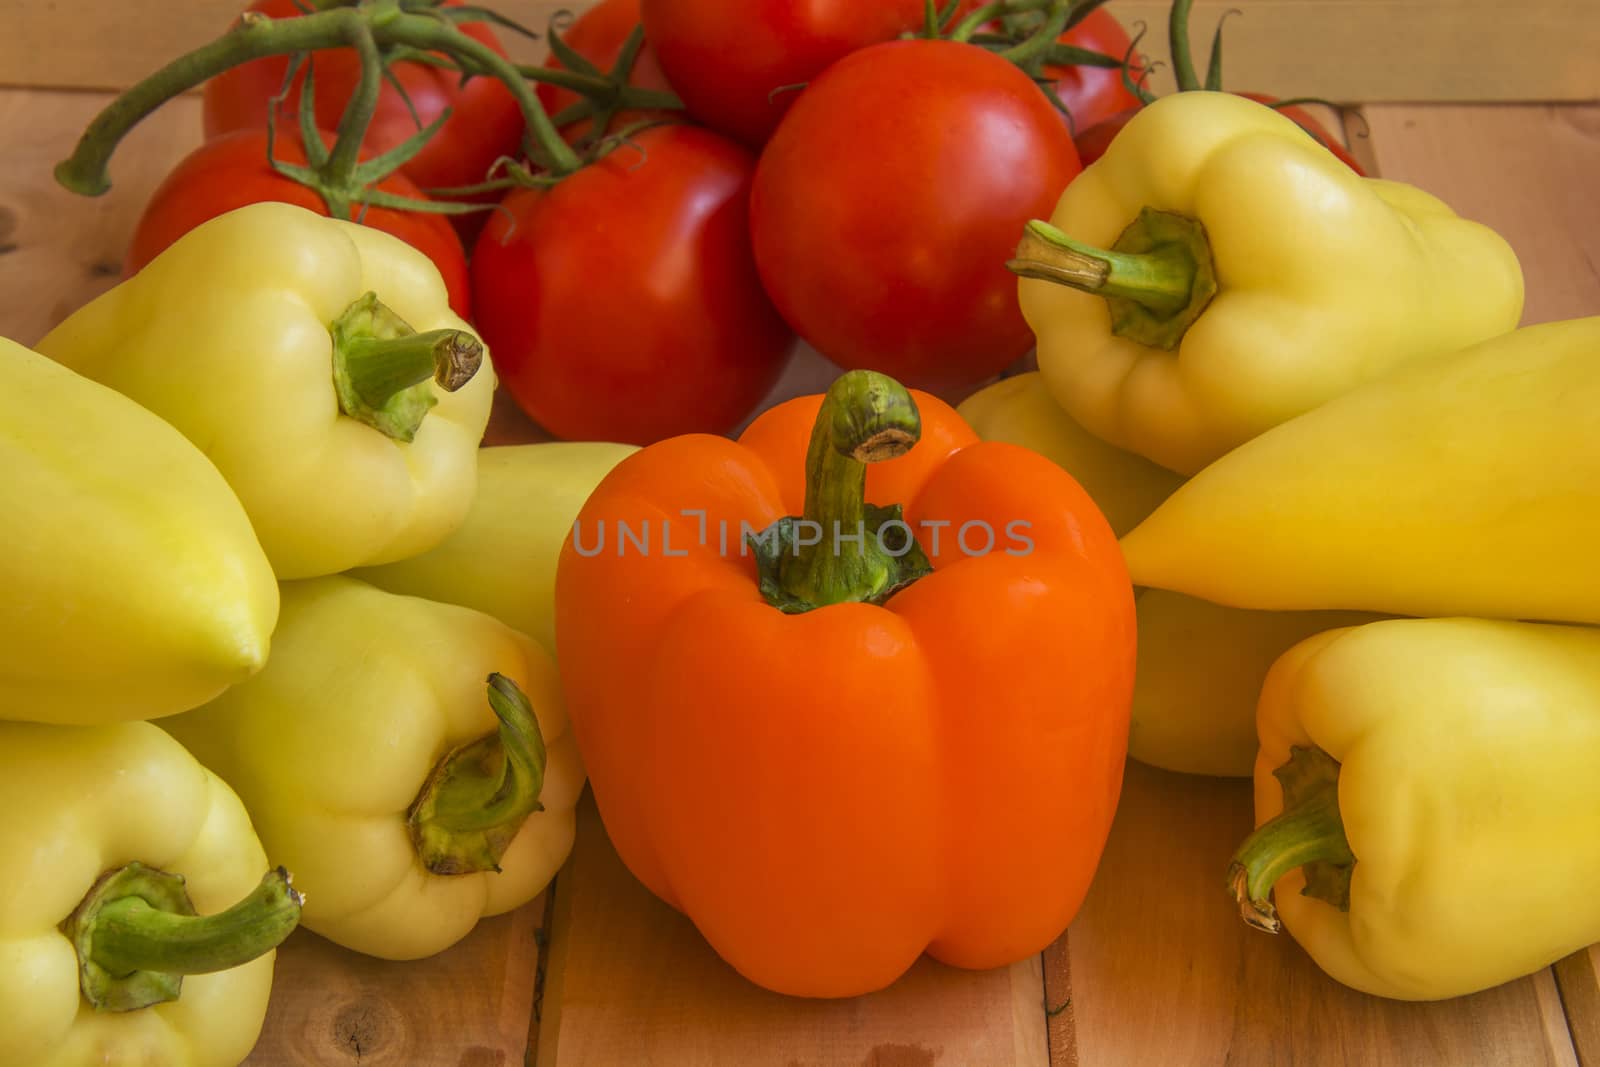 Fresh organic vegetables on a wooden surface
